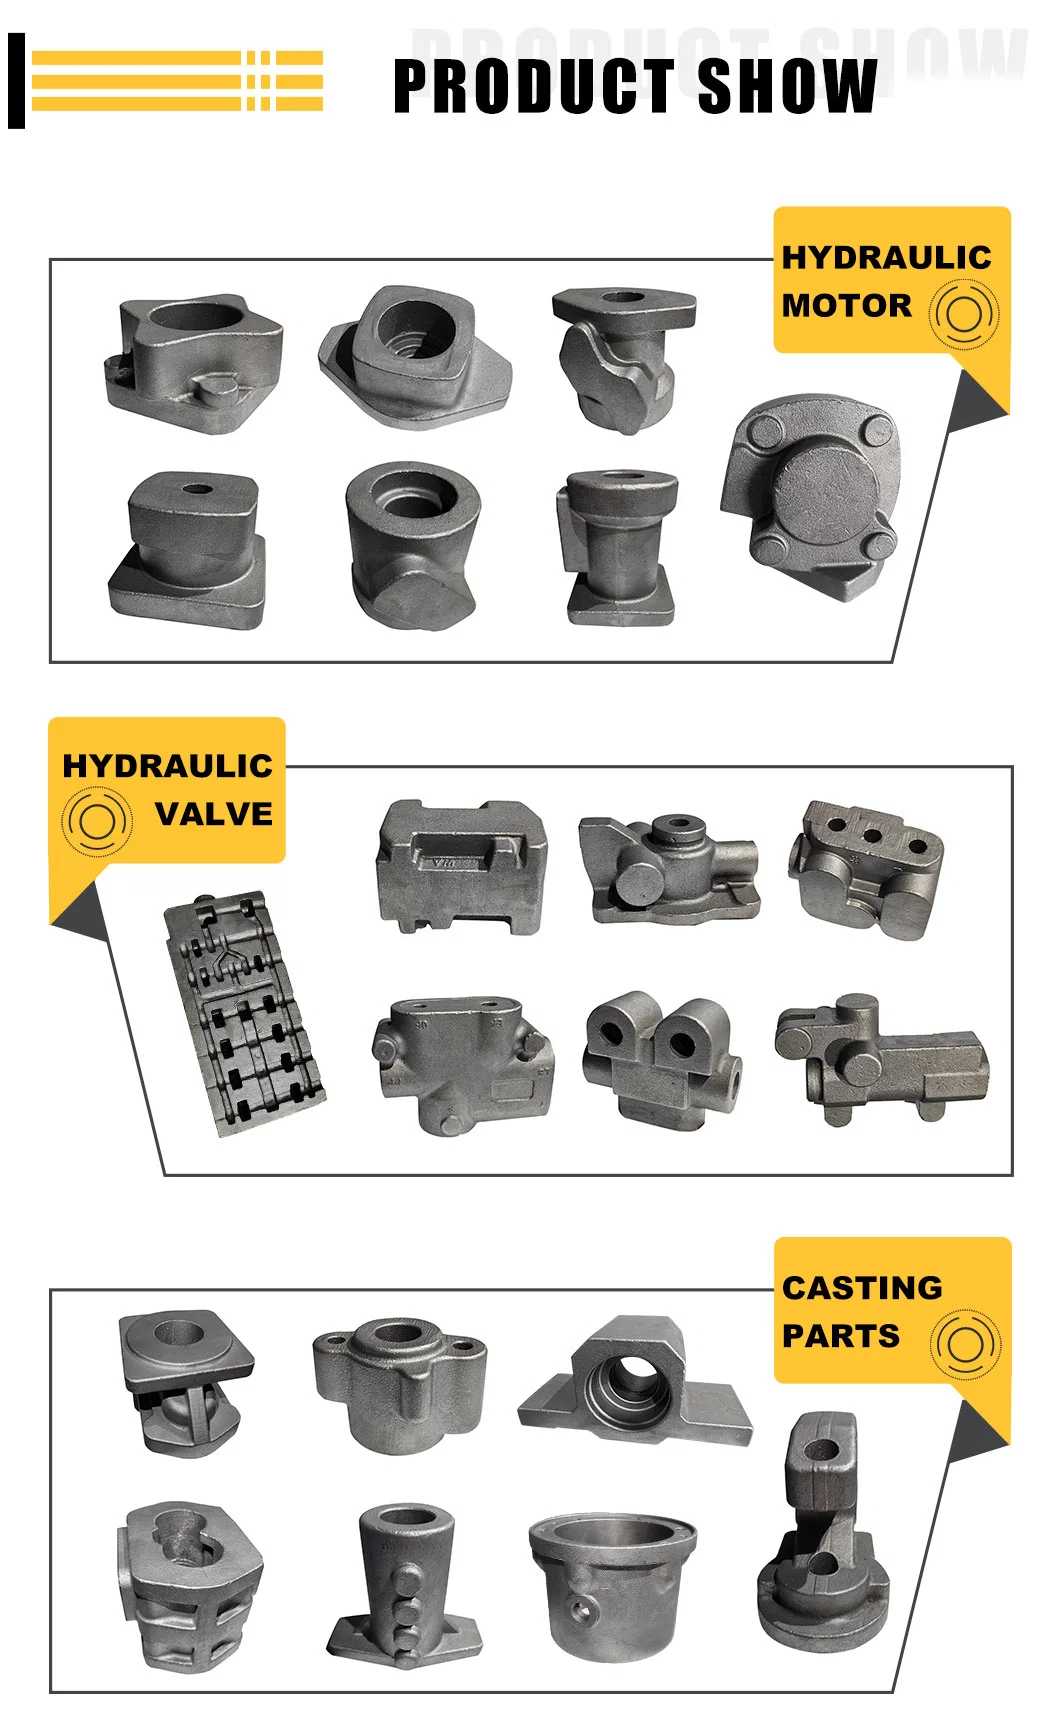 Iron Sand Casting High Pressure Rating Compact Structure Piston Pumps for Hydraulic Presses